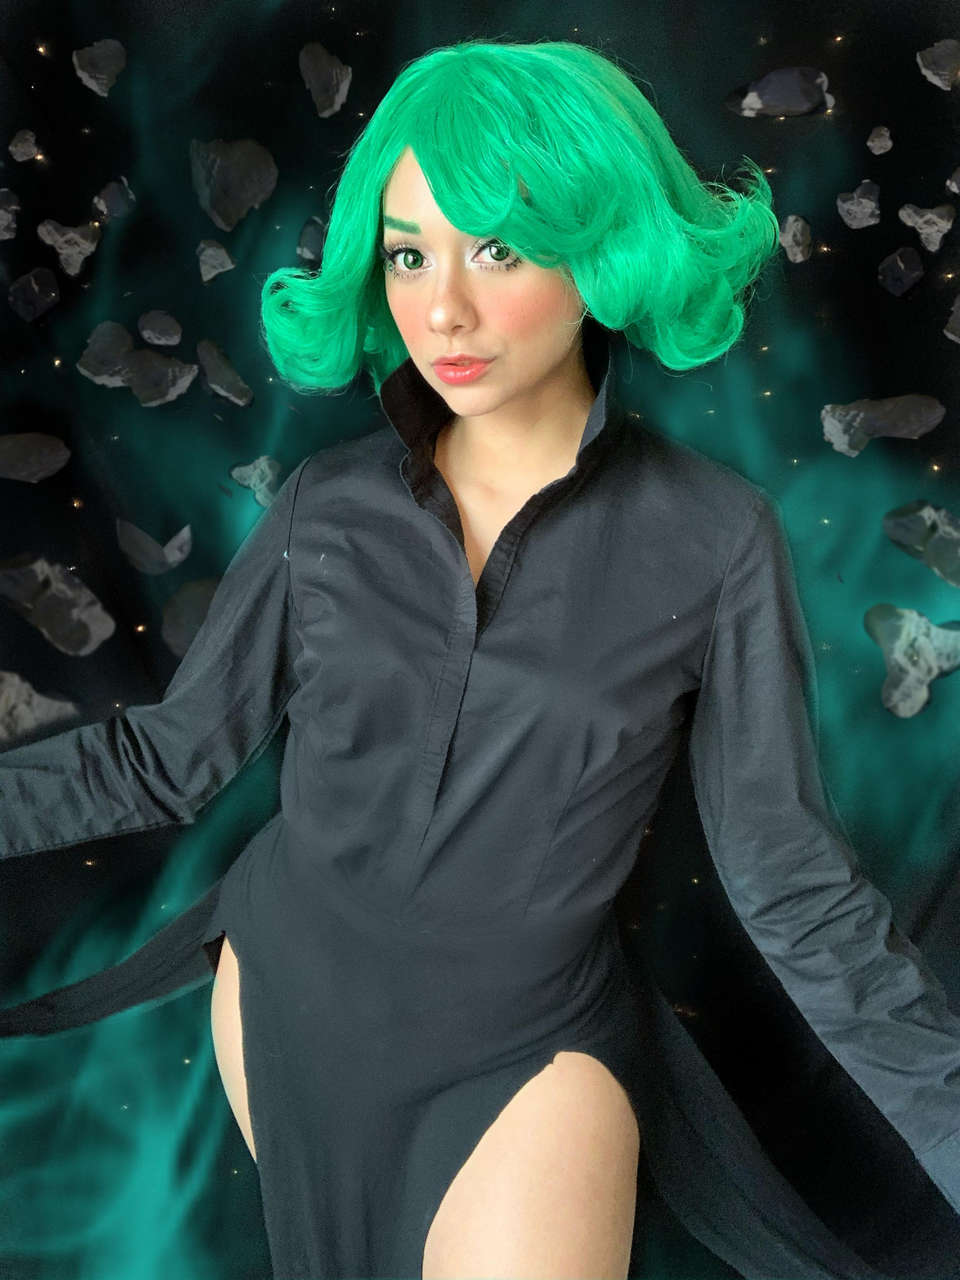 Tatsumaki Tornado From One Punch Man By Talivers